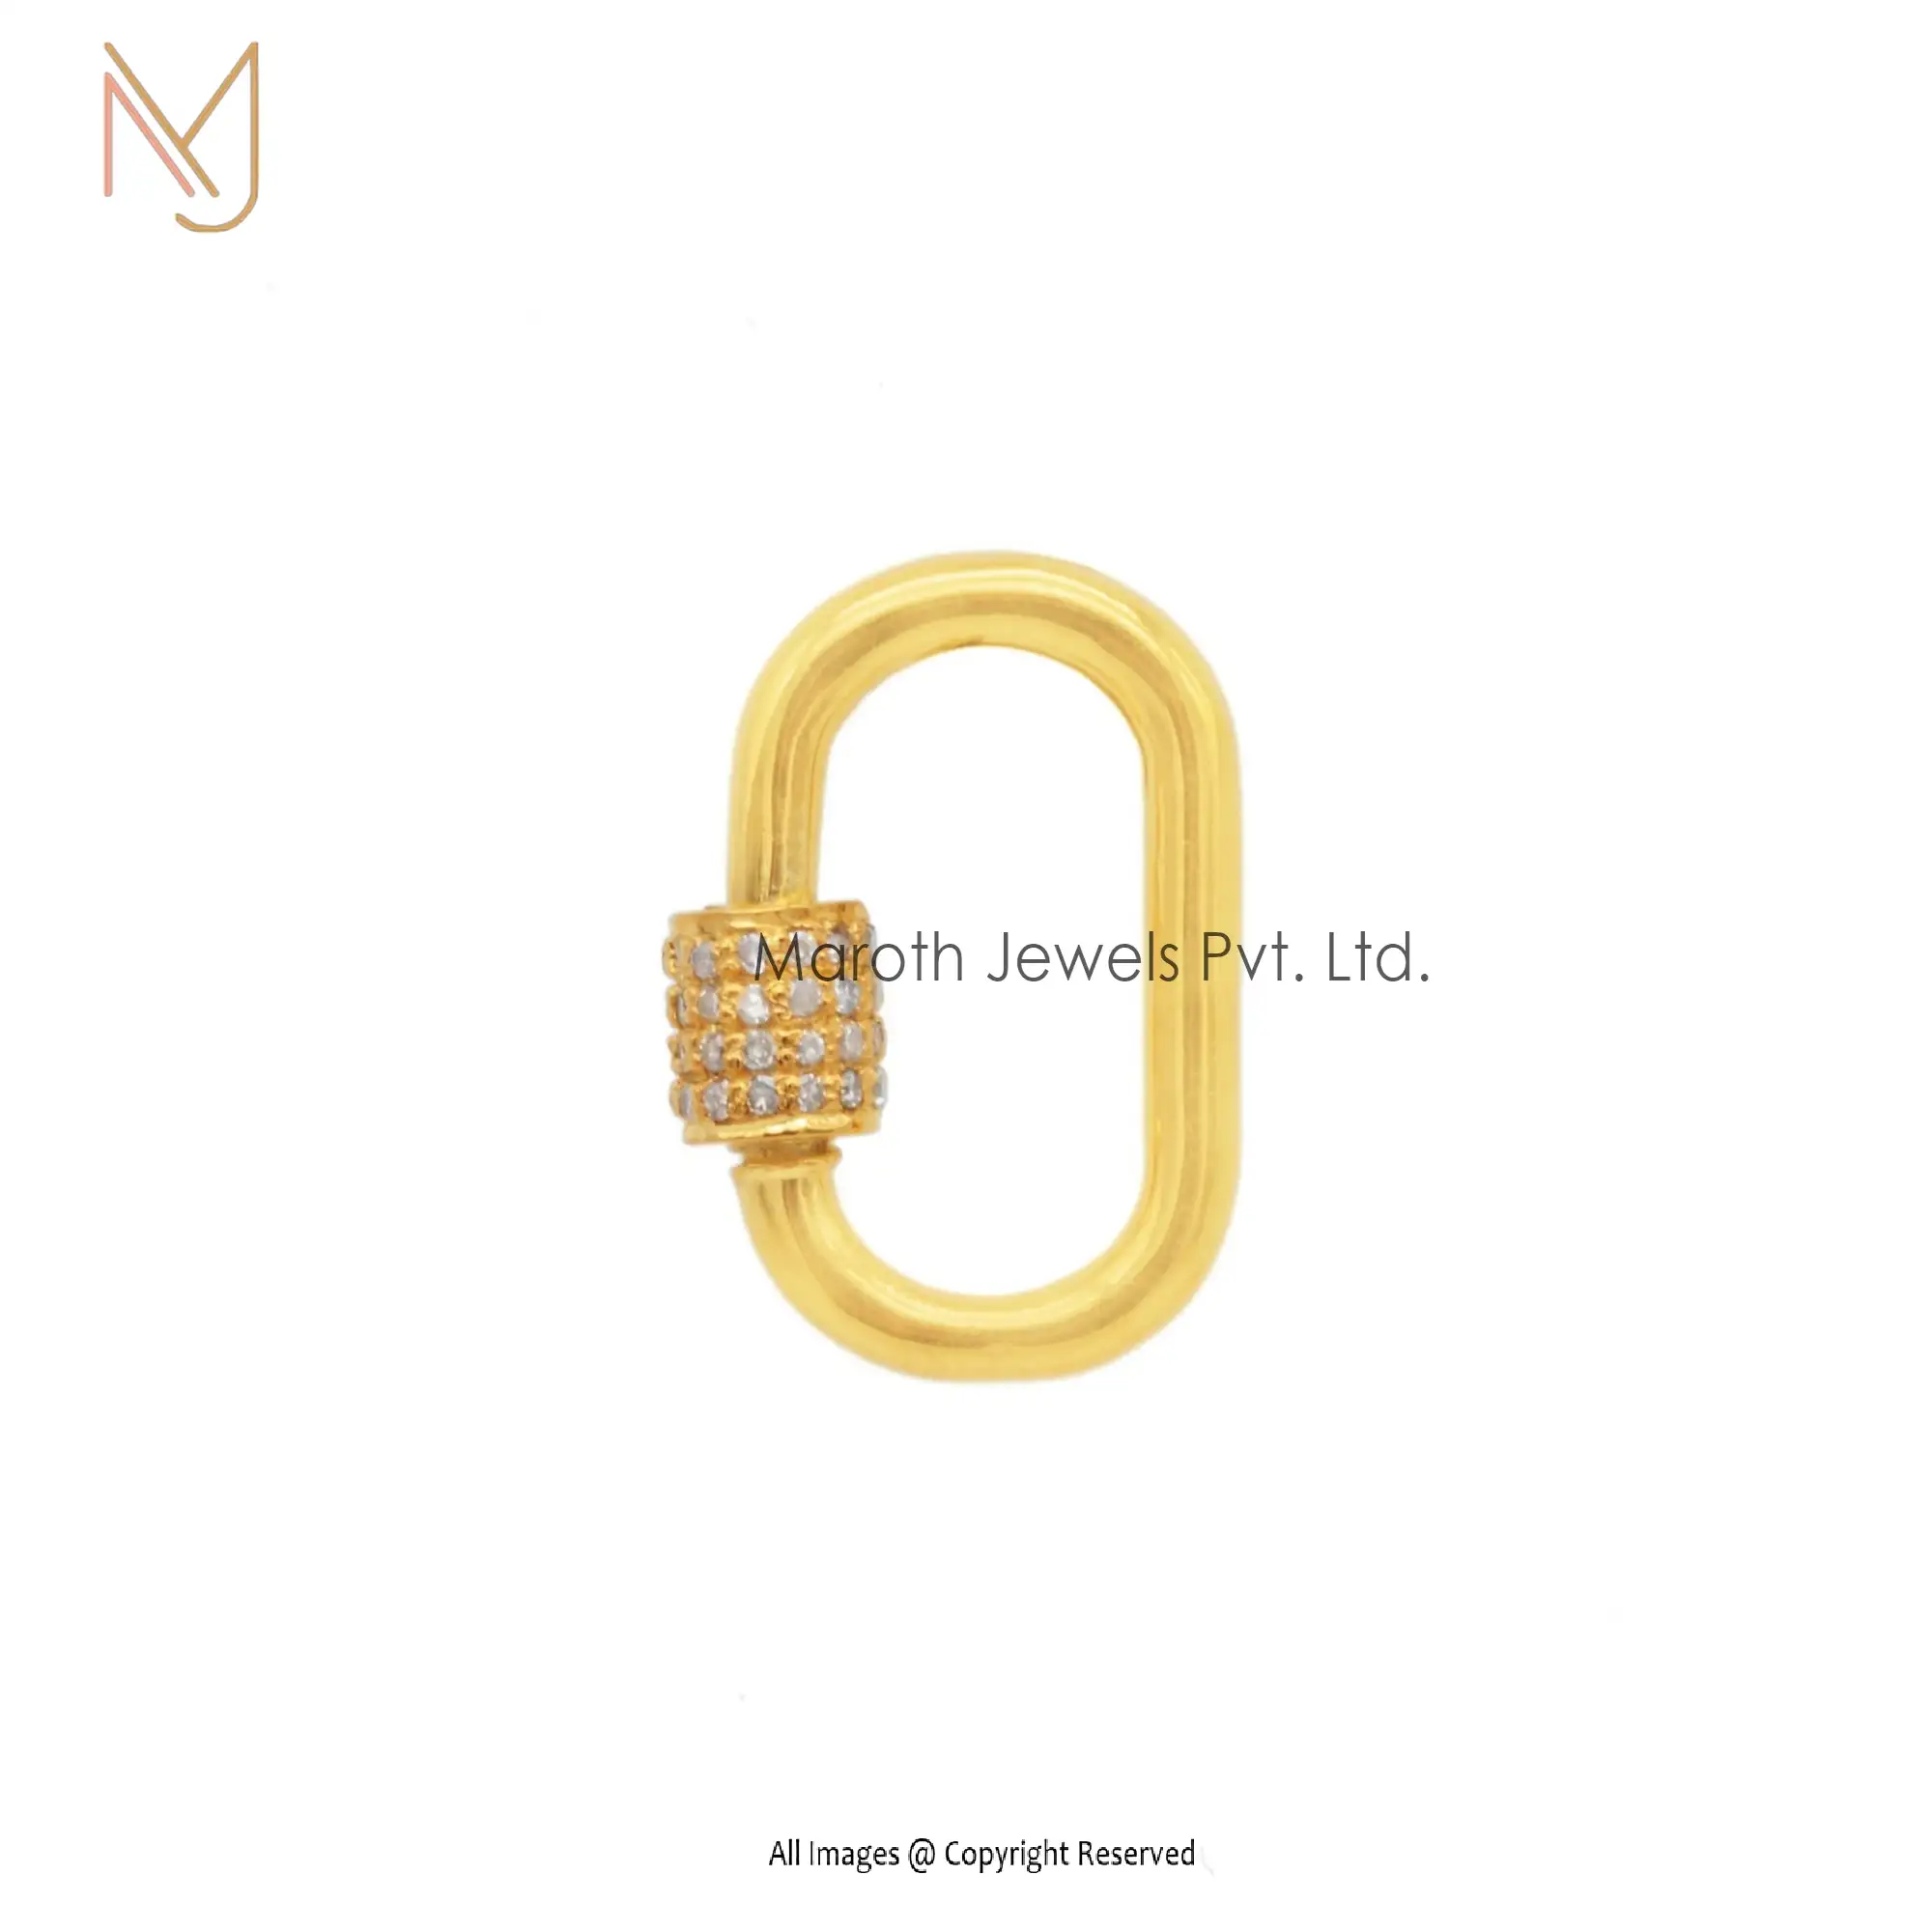 14K Solid Yellow Gold Pave Diamond Carabiner Baby Findings Lock Manufacturer